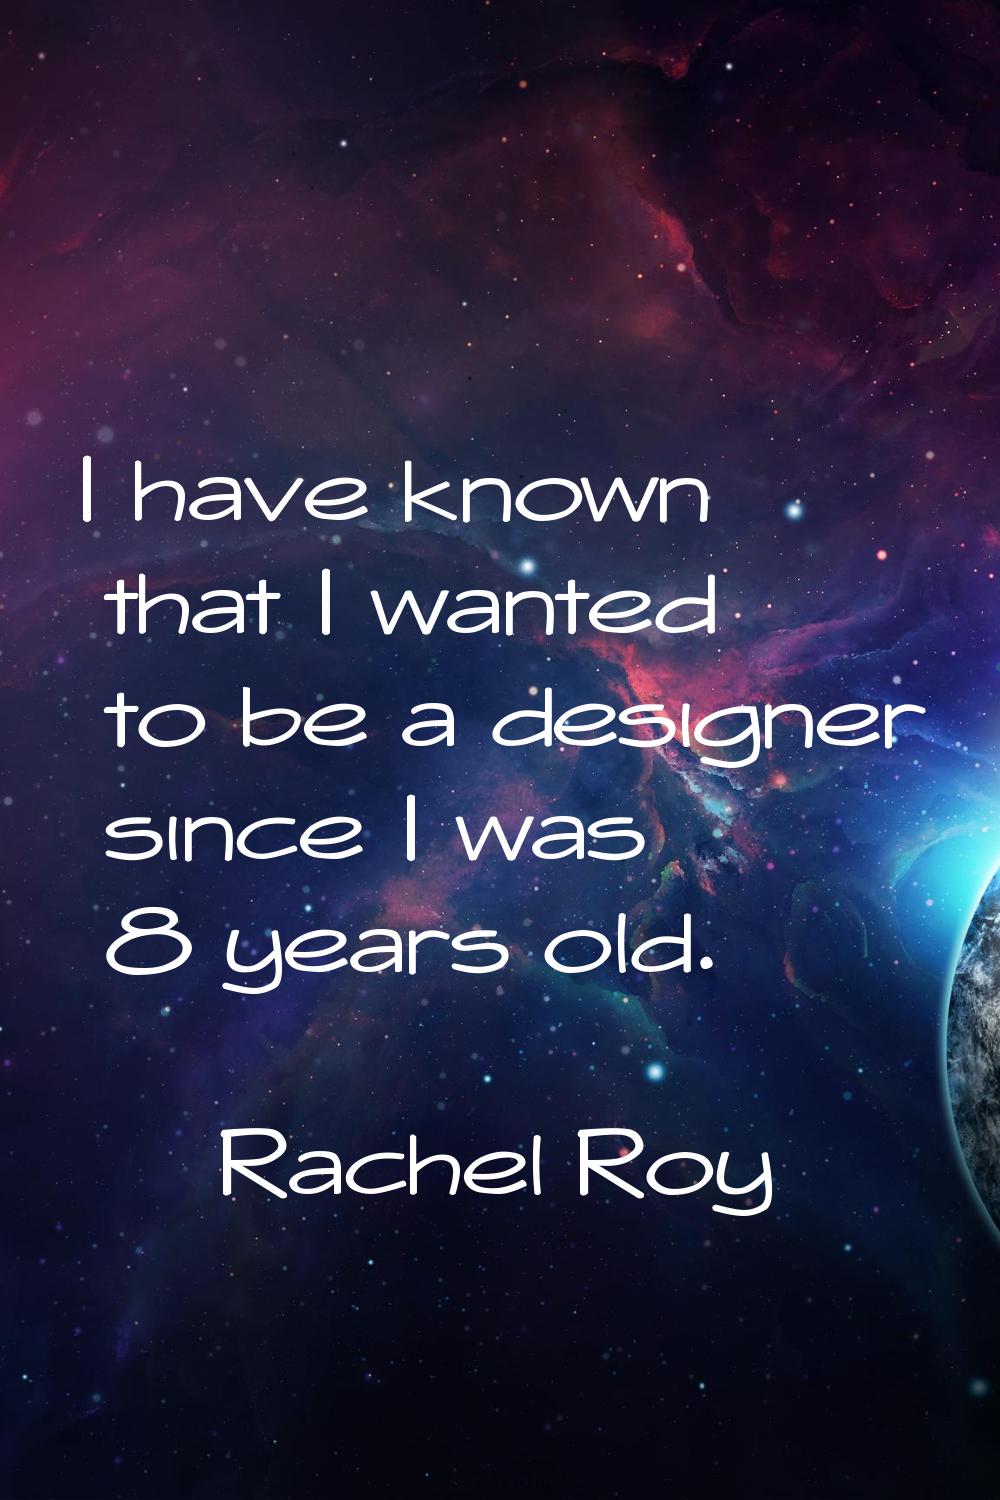 I have known that I wanted to be a designer since I was 8 years old.